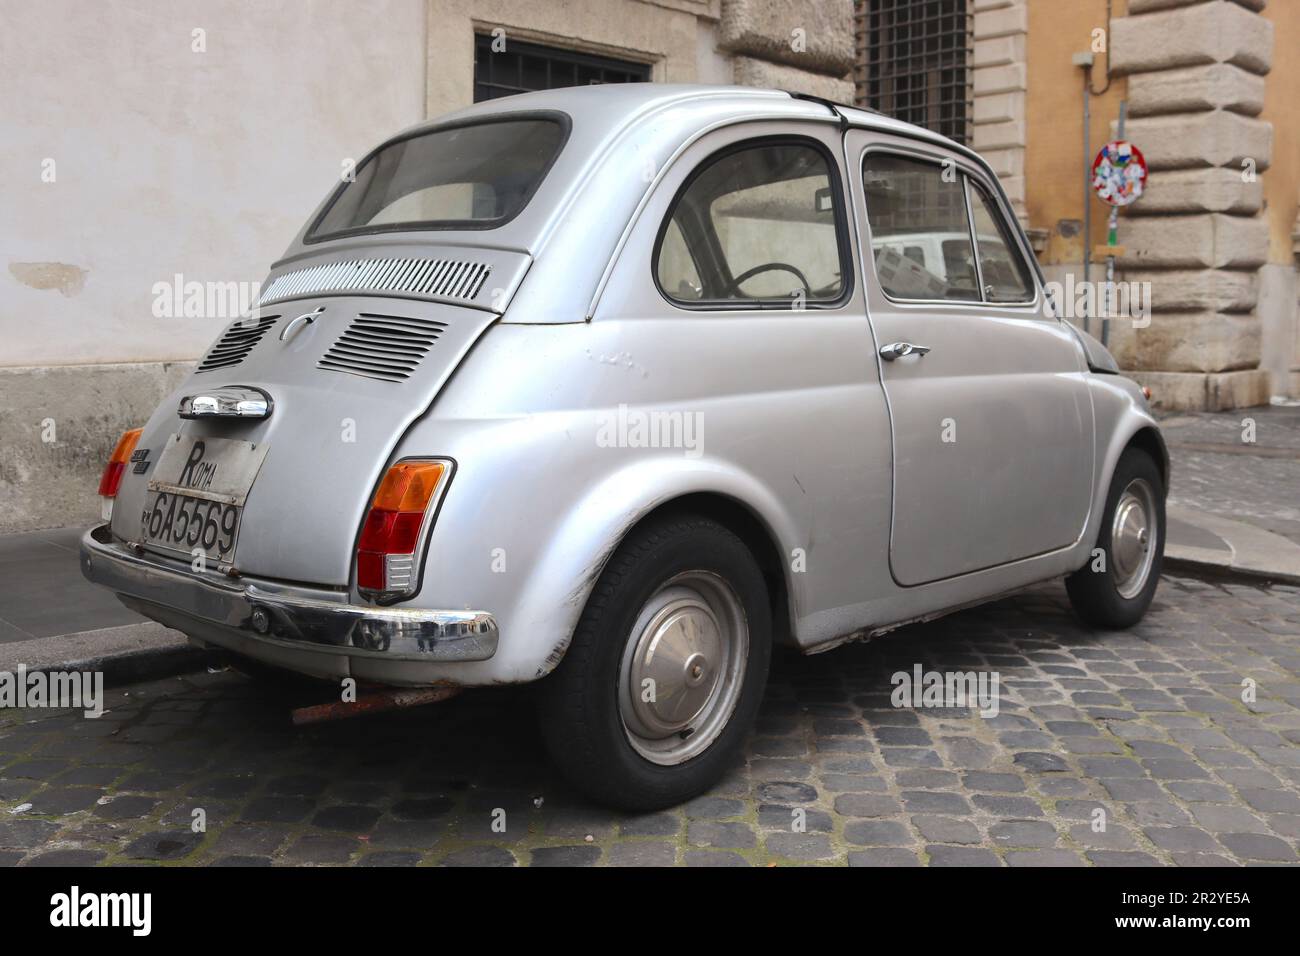 Fiat 500 in battle scarred condition evident to driving the streets of Rome for years. Despite bubbling paint and visible dents, it remains a survivor. Stock Photo